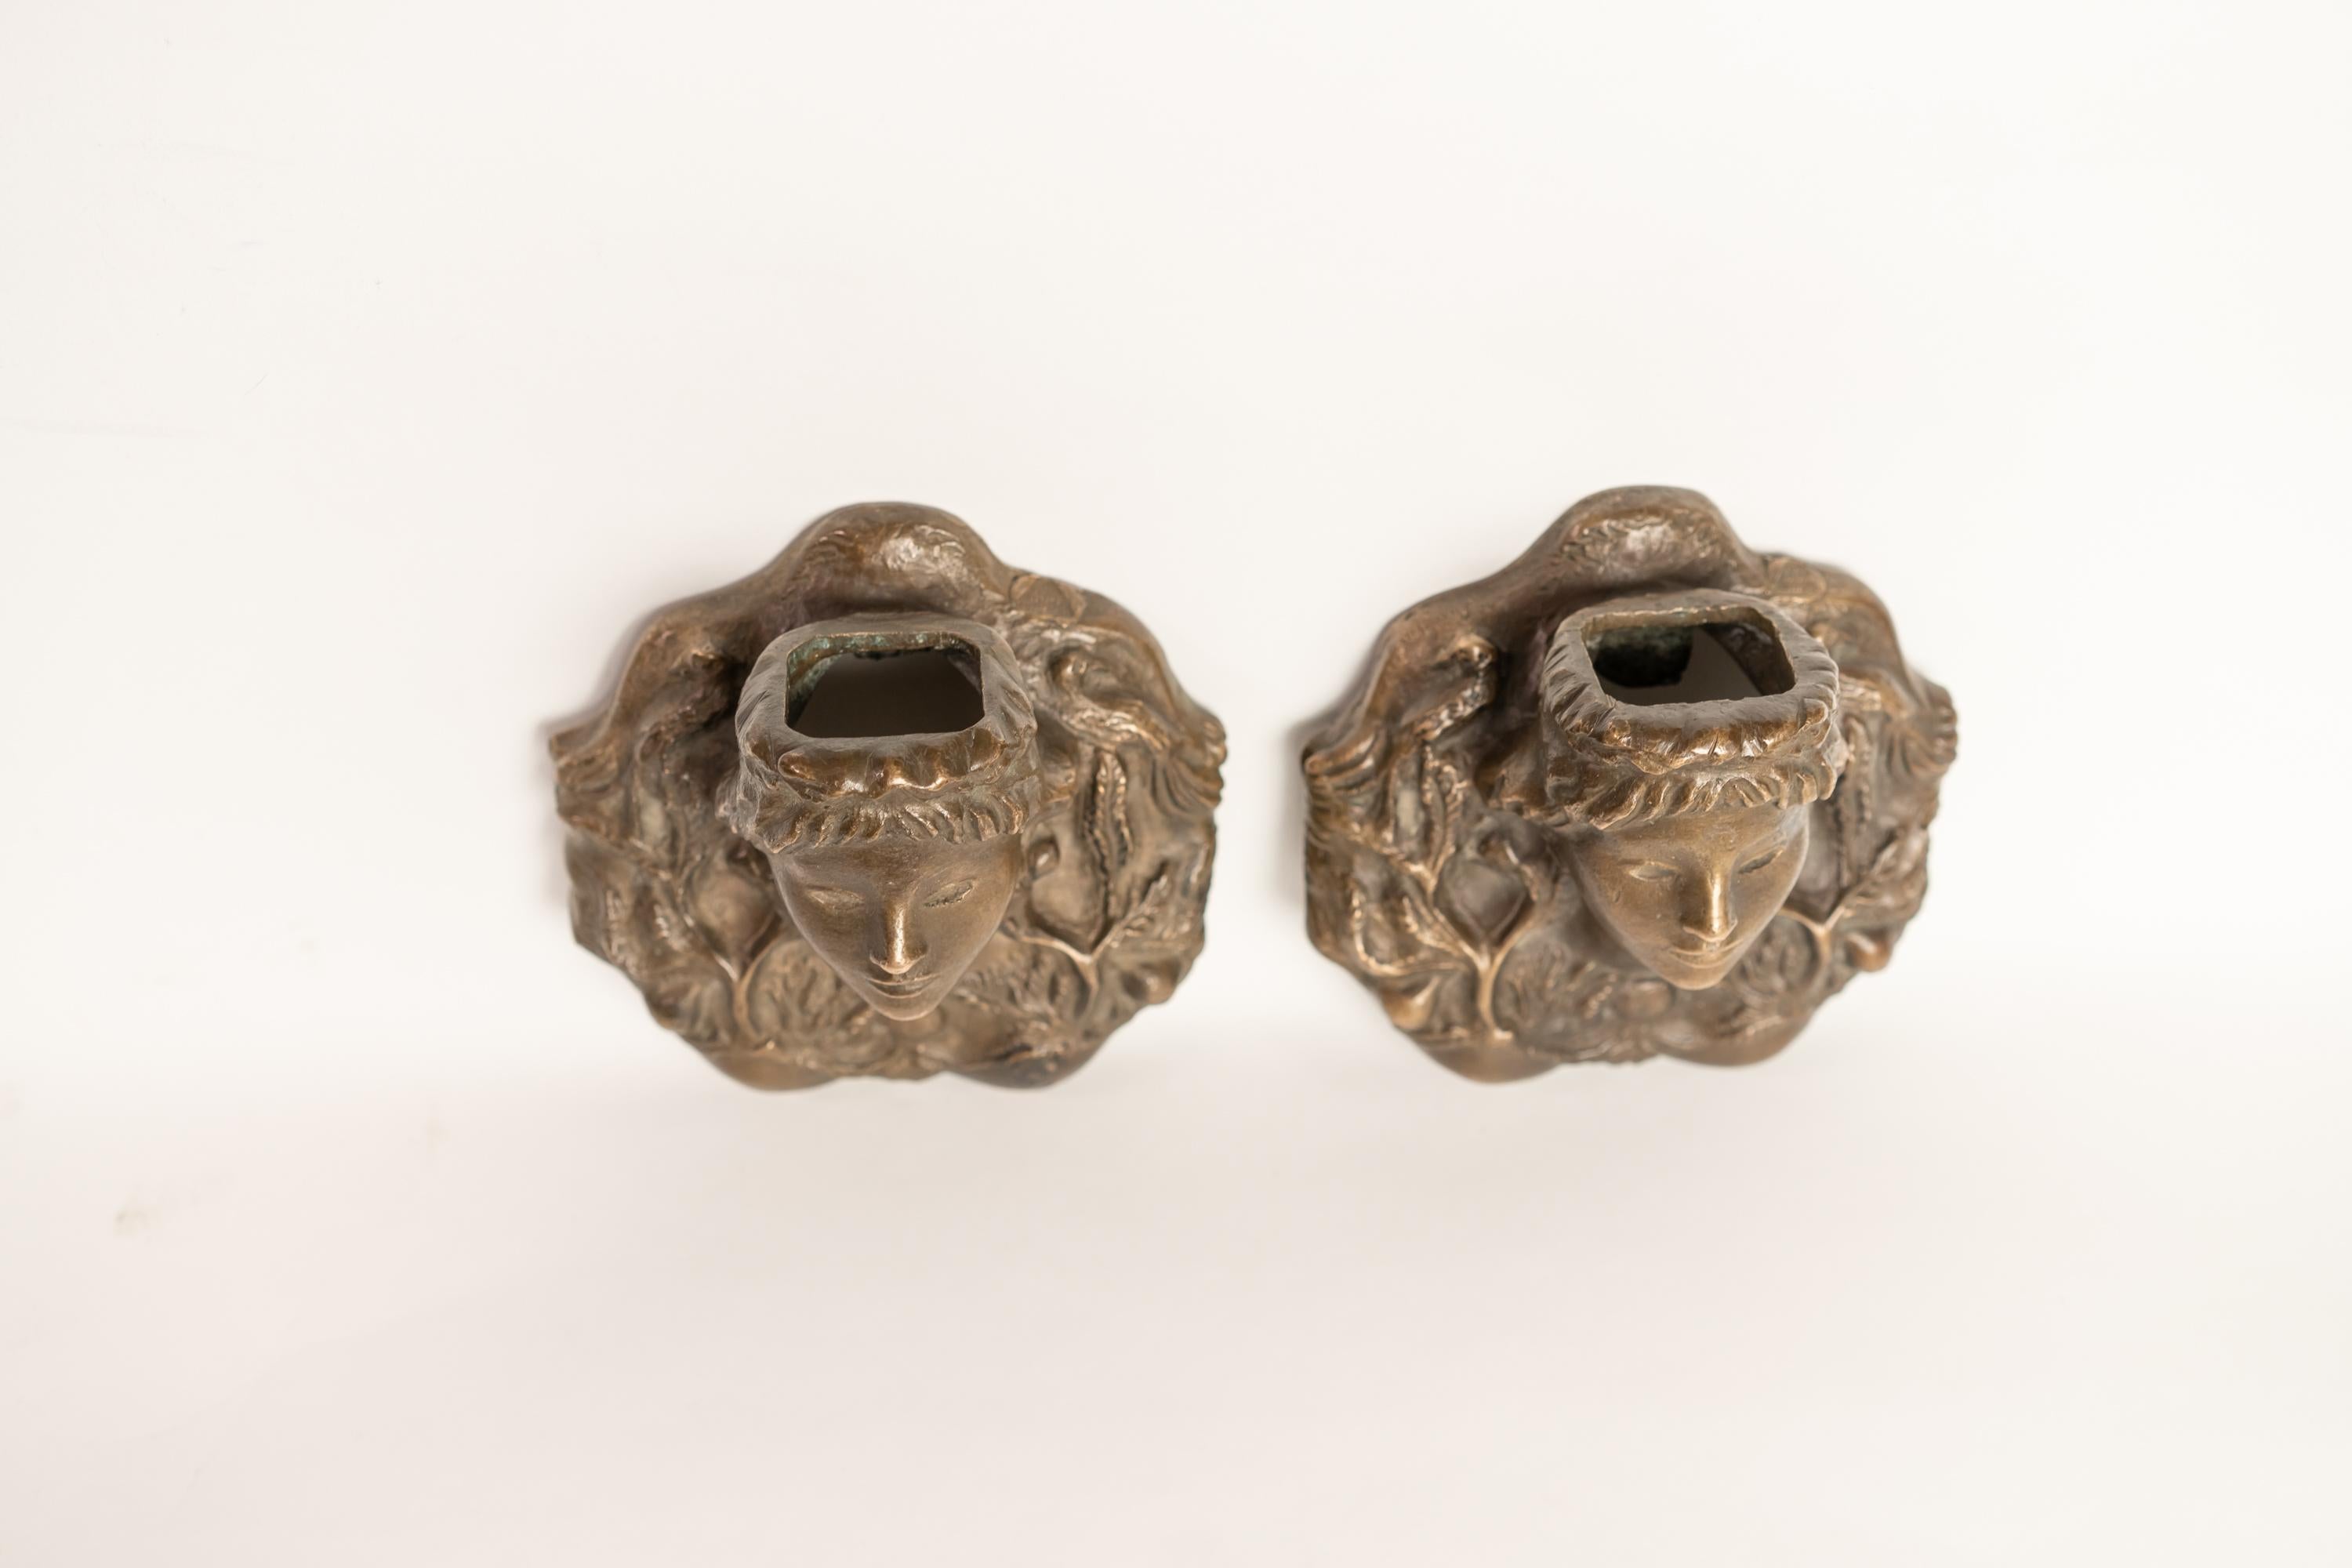 Rare pair of solid bronze sconces by Vadim Androusov representing females figures in Merovingian style. Signed: 